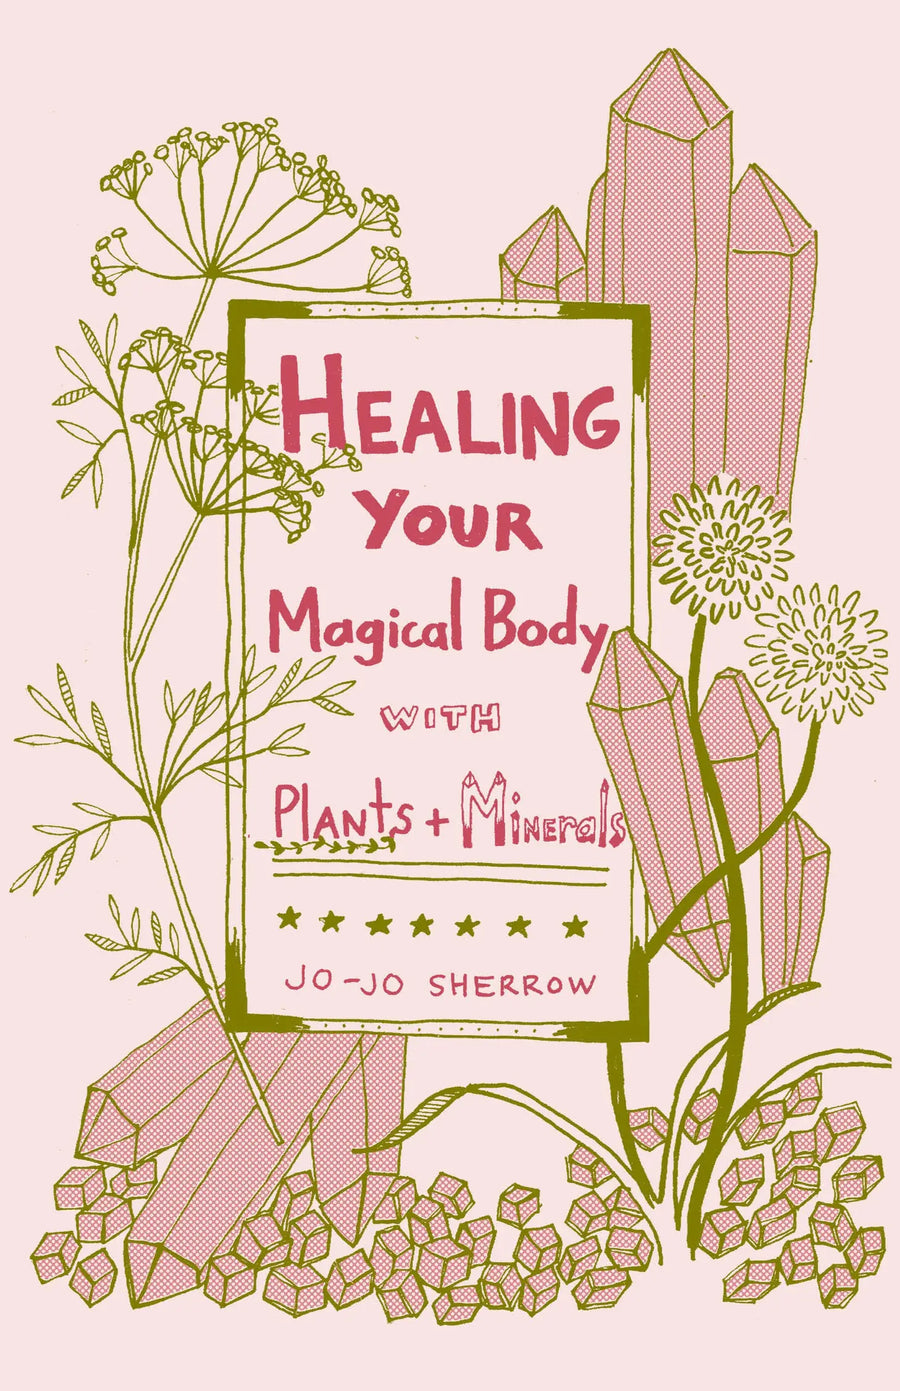 Healing Your Magical Body with Plants + Minerals